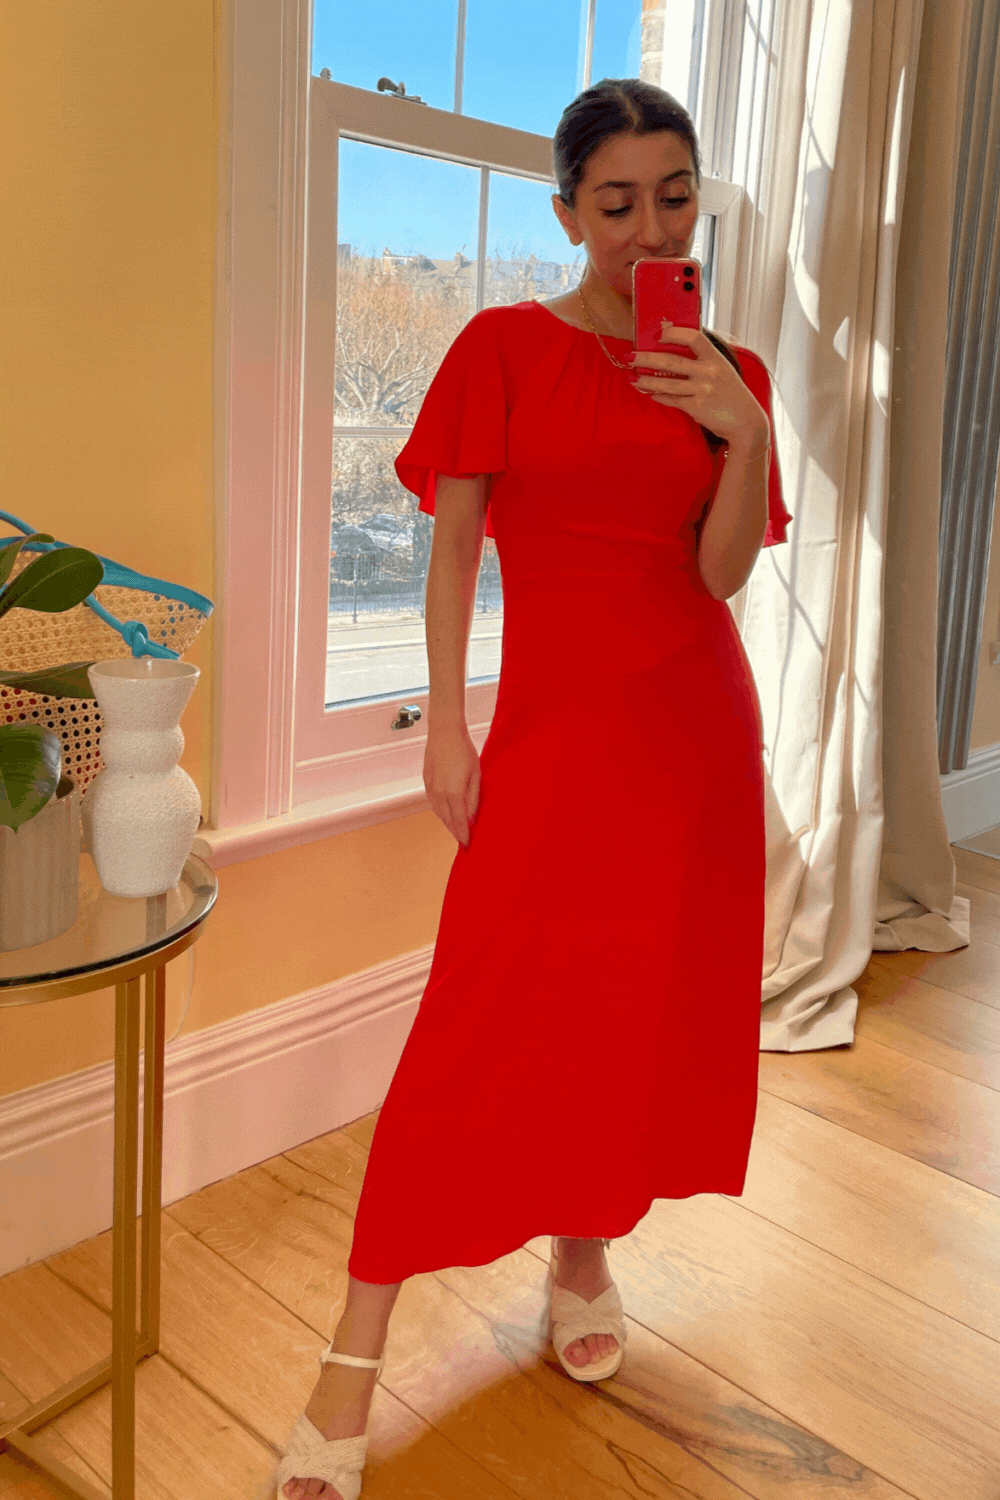 Petite Try On: Whistles red dress